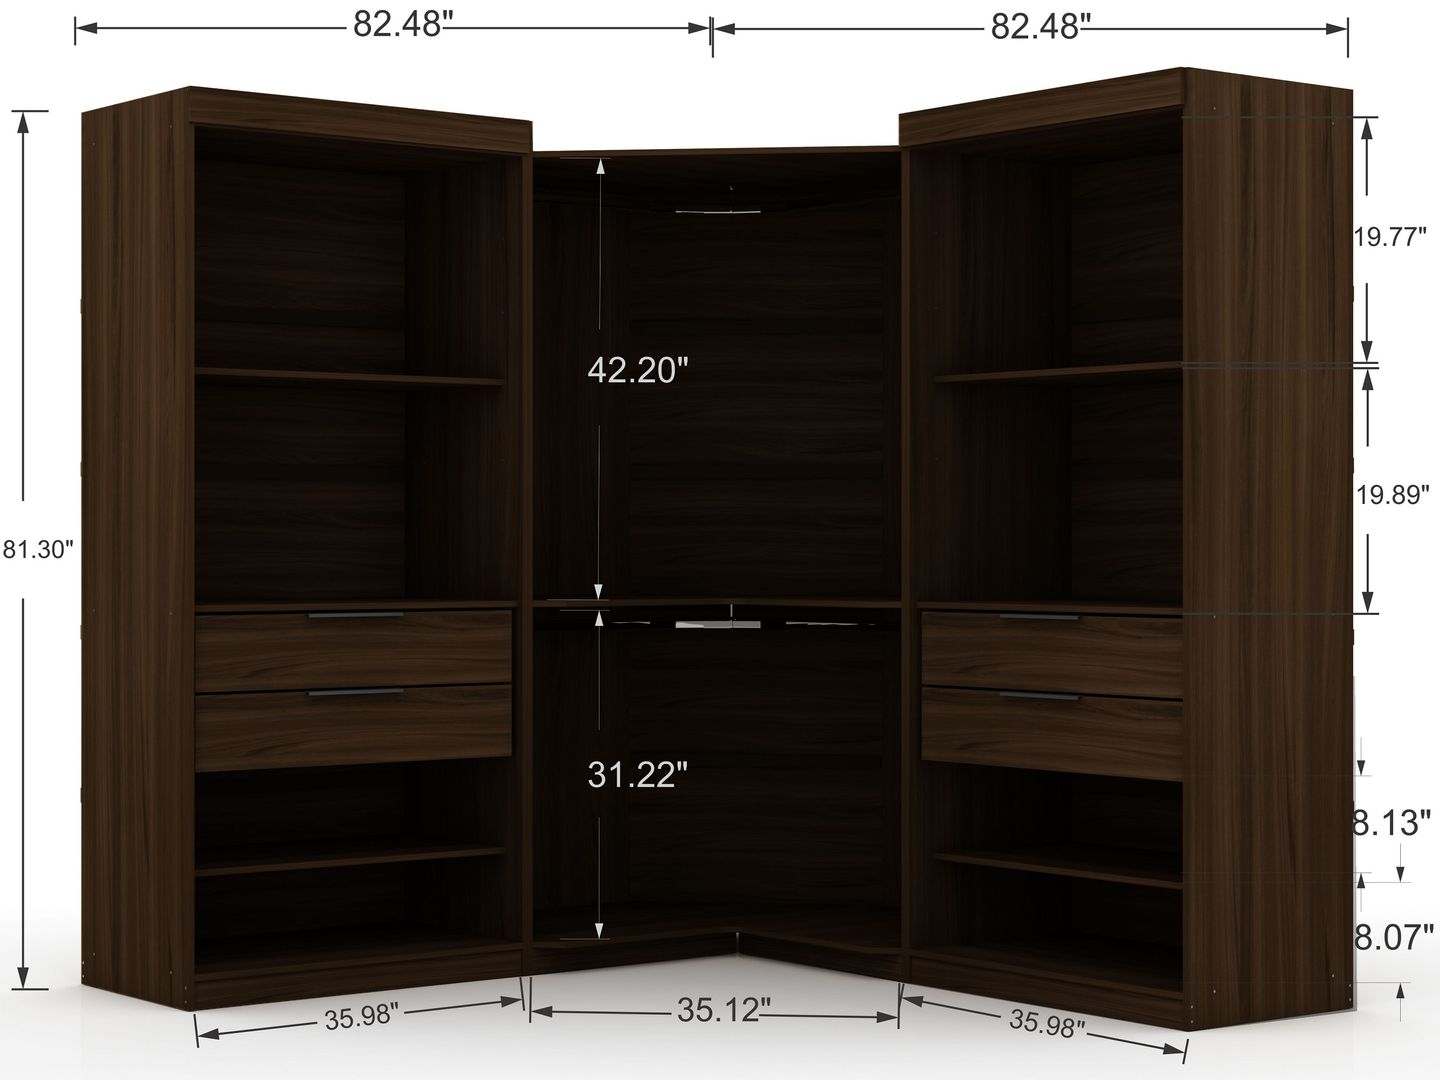 Manhattan Comfort Mulberry 3.0 Sectional Modern Wardrobe Corner Closet with 4 Drawers - Set of 3 in Brown